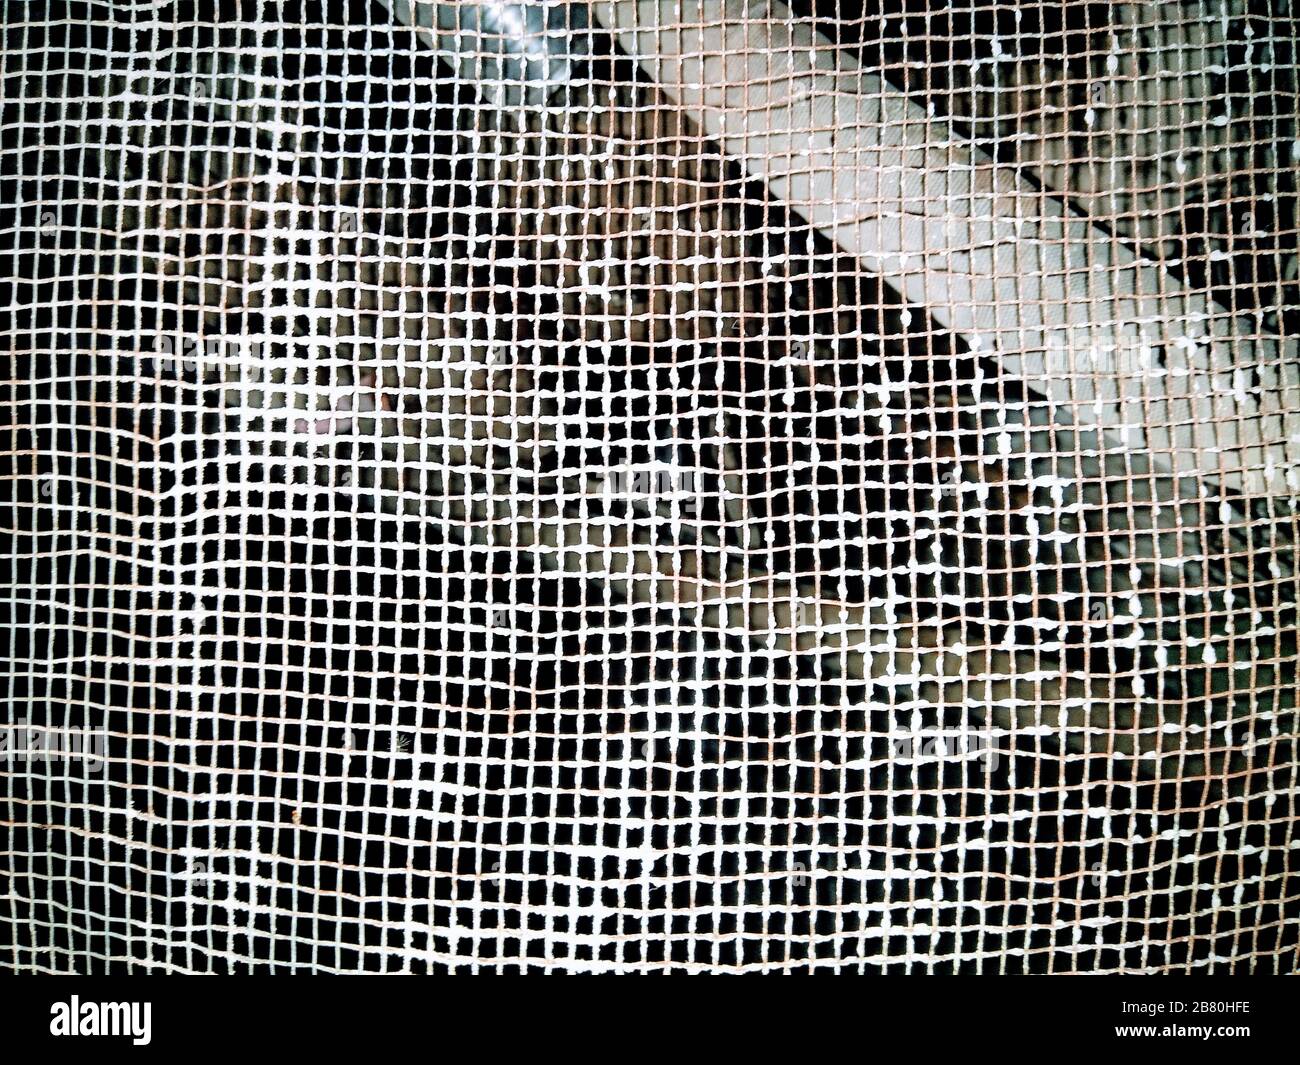 Net of stainless steel Stock Photo